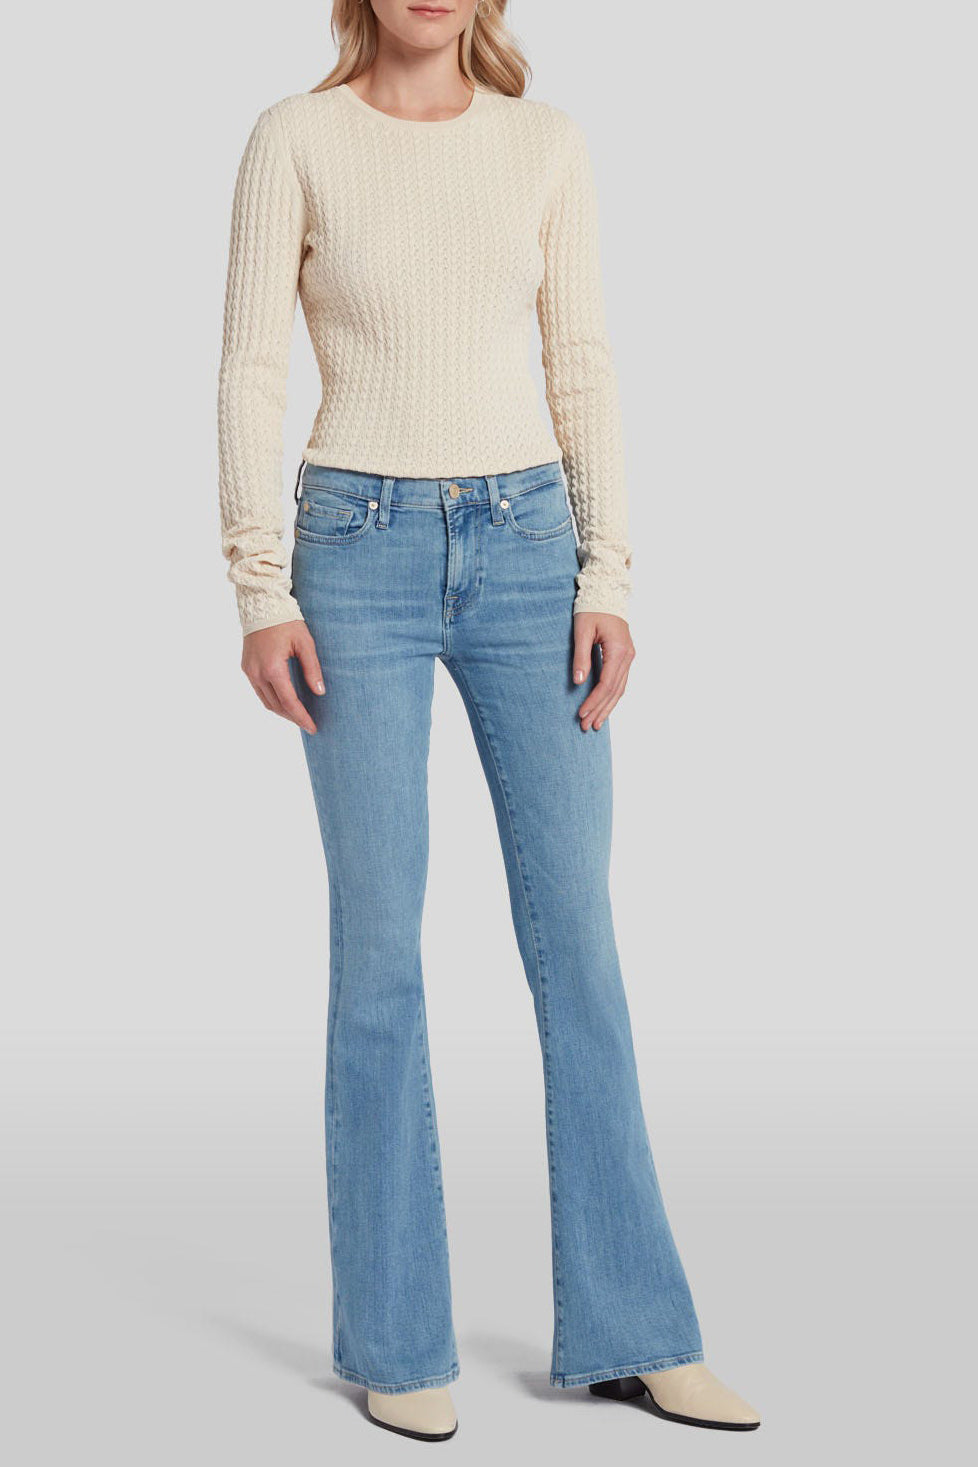 Jeans HW Ali Slim Illusion in Light Blue7 For All Mankind - Anita Hass